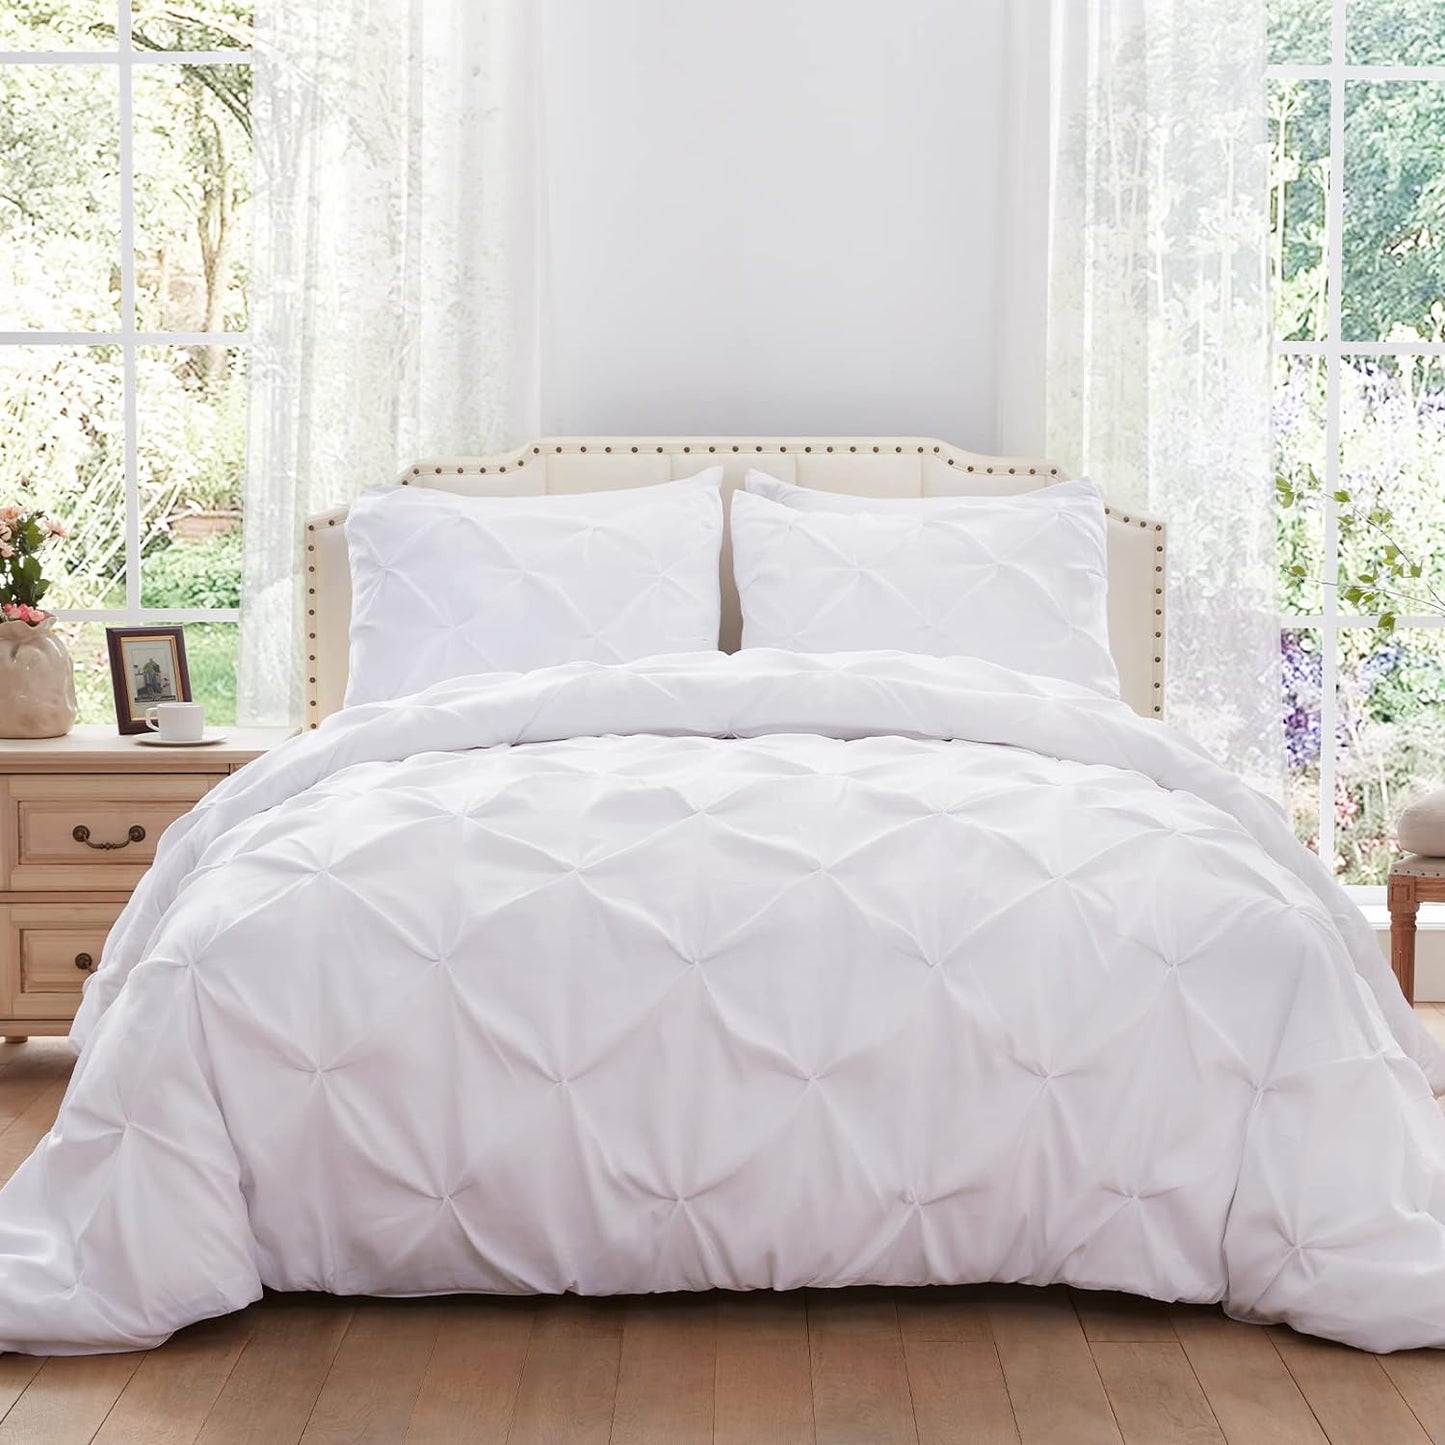 White Pinch Pleated 3 Piece Duvet Cover Set